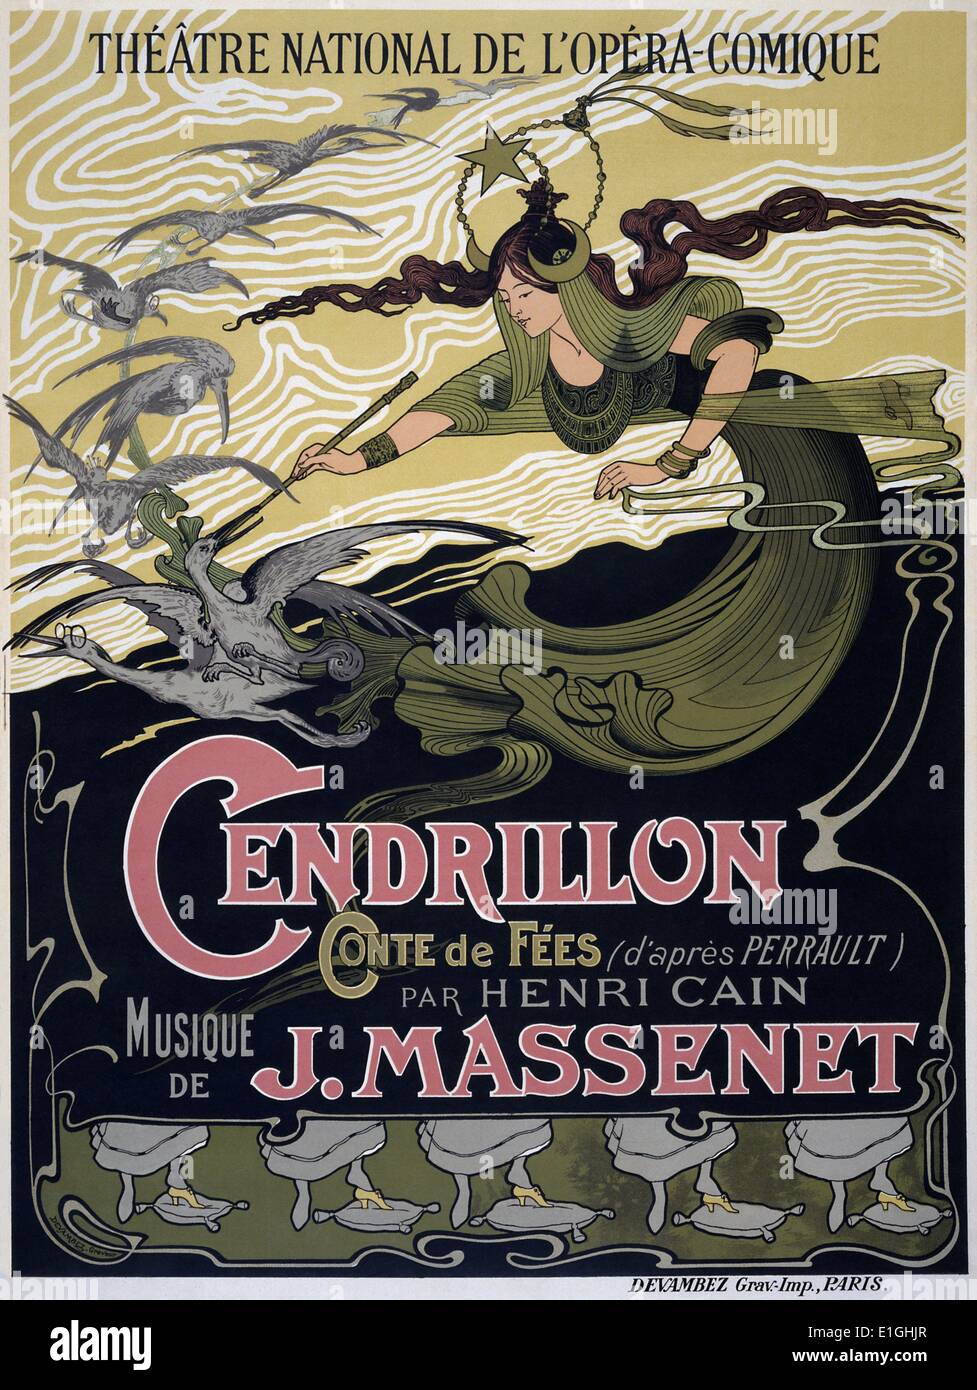 Cendrillon (Cinderella) is an opera—described as a 'fairy tale'—in four acts by Jules Massenet to a French libretto by Henri Caïn based on Perrault's 1698 version of the Cinderella fairy tale. It was given its premiere performance on 24 May 1899 in Paris. Stock Photo